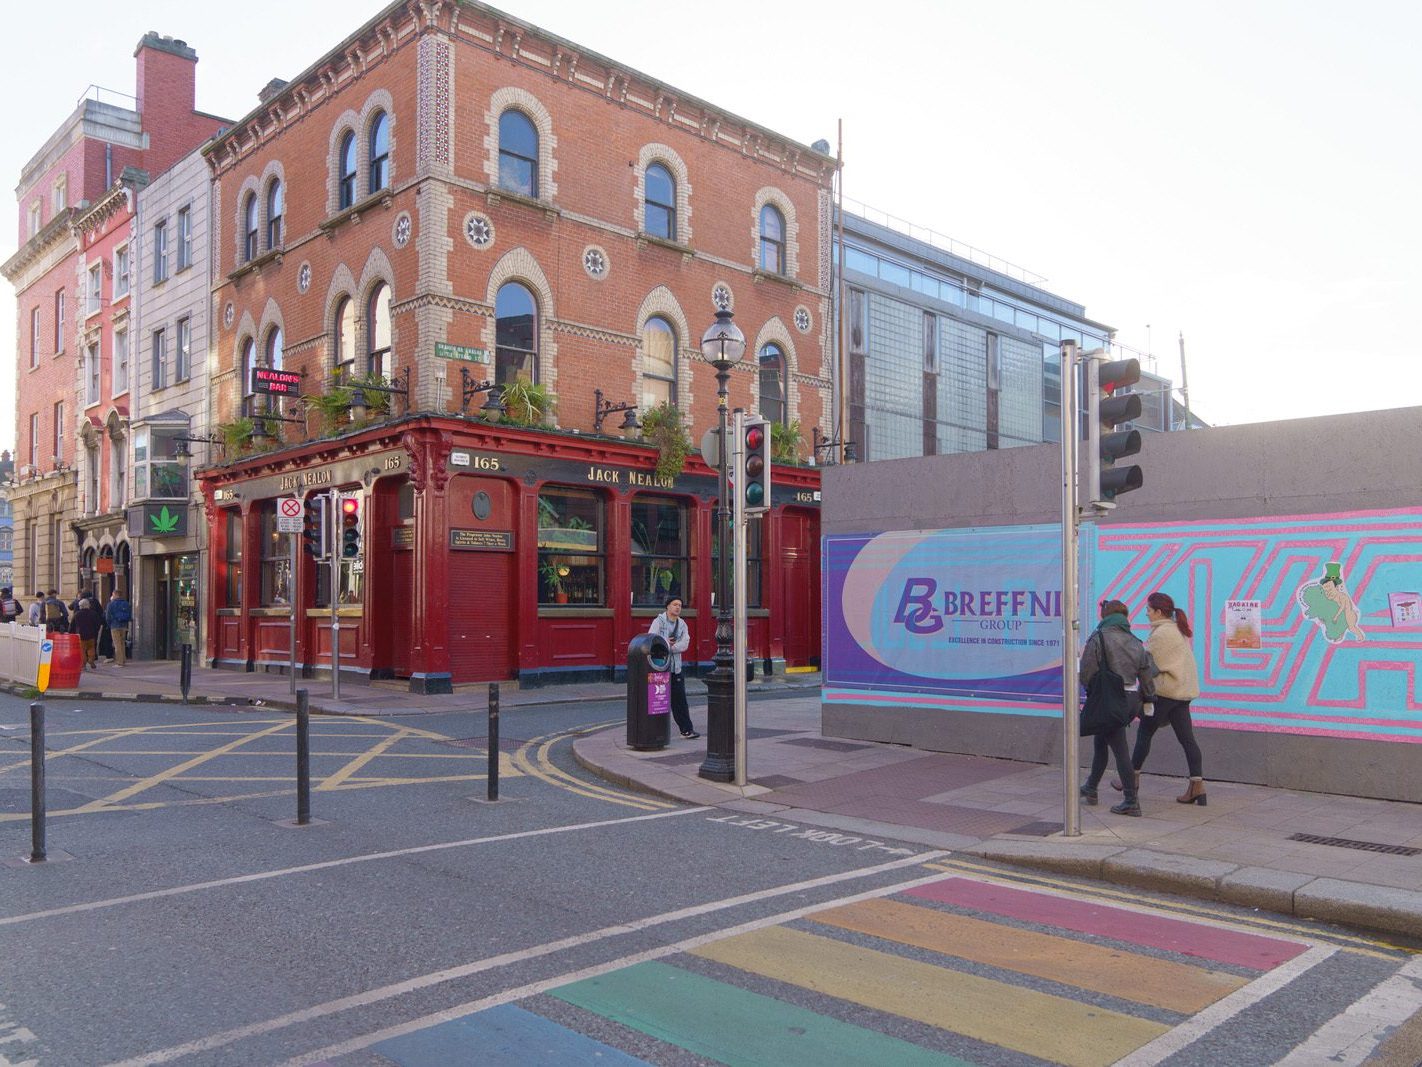 CAPEL STREET IS STILL A W.I.P. [THE PERIOD BETWEEN HALLOWEEN AND CHRISTMAS]-224801-1